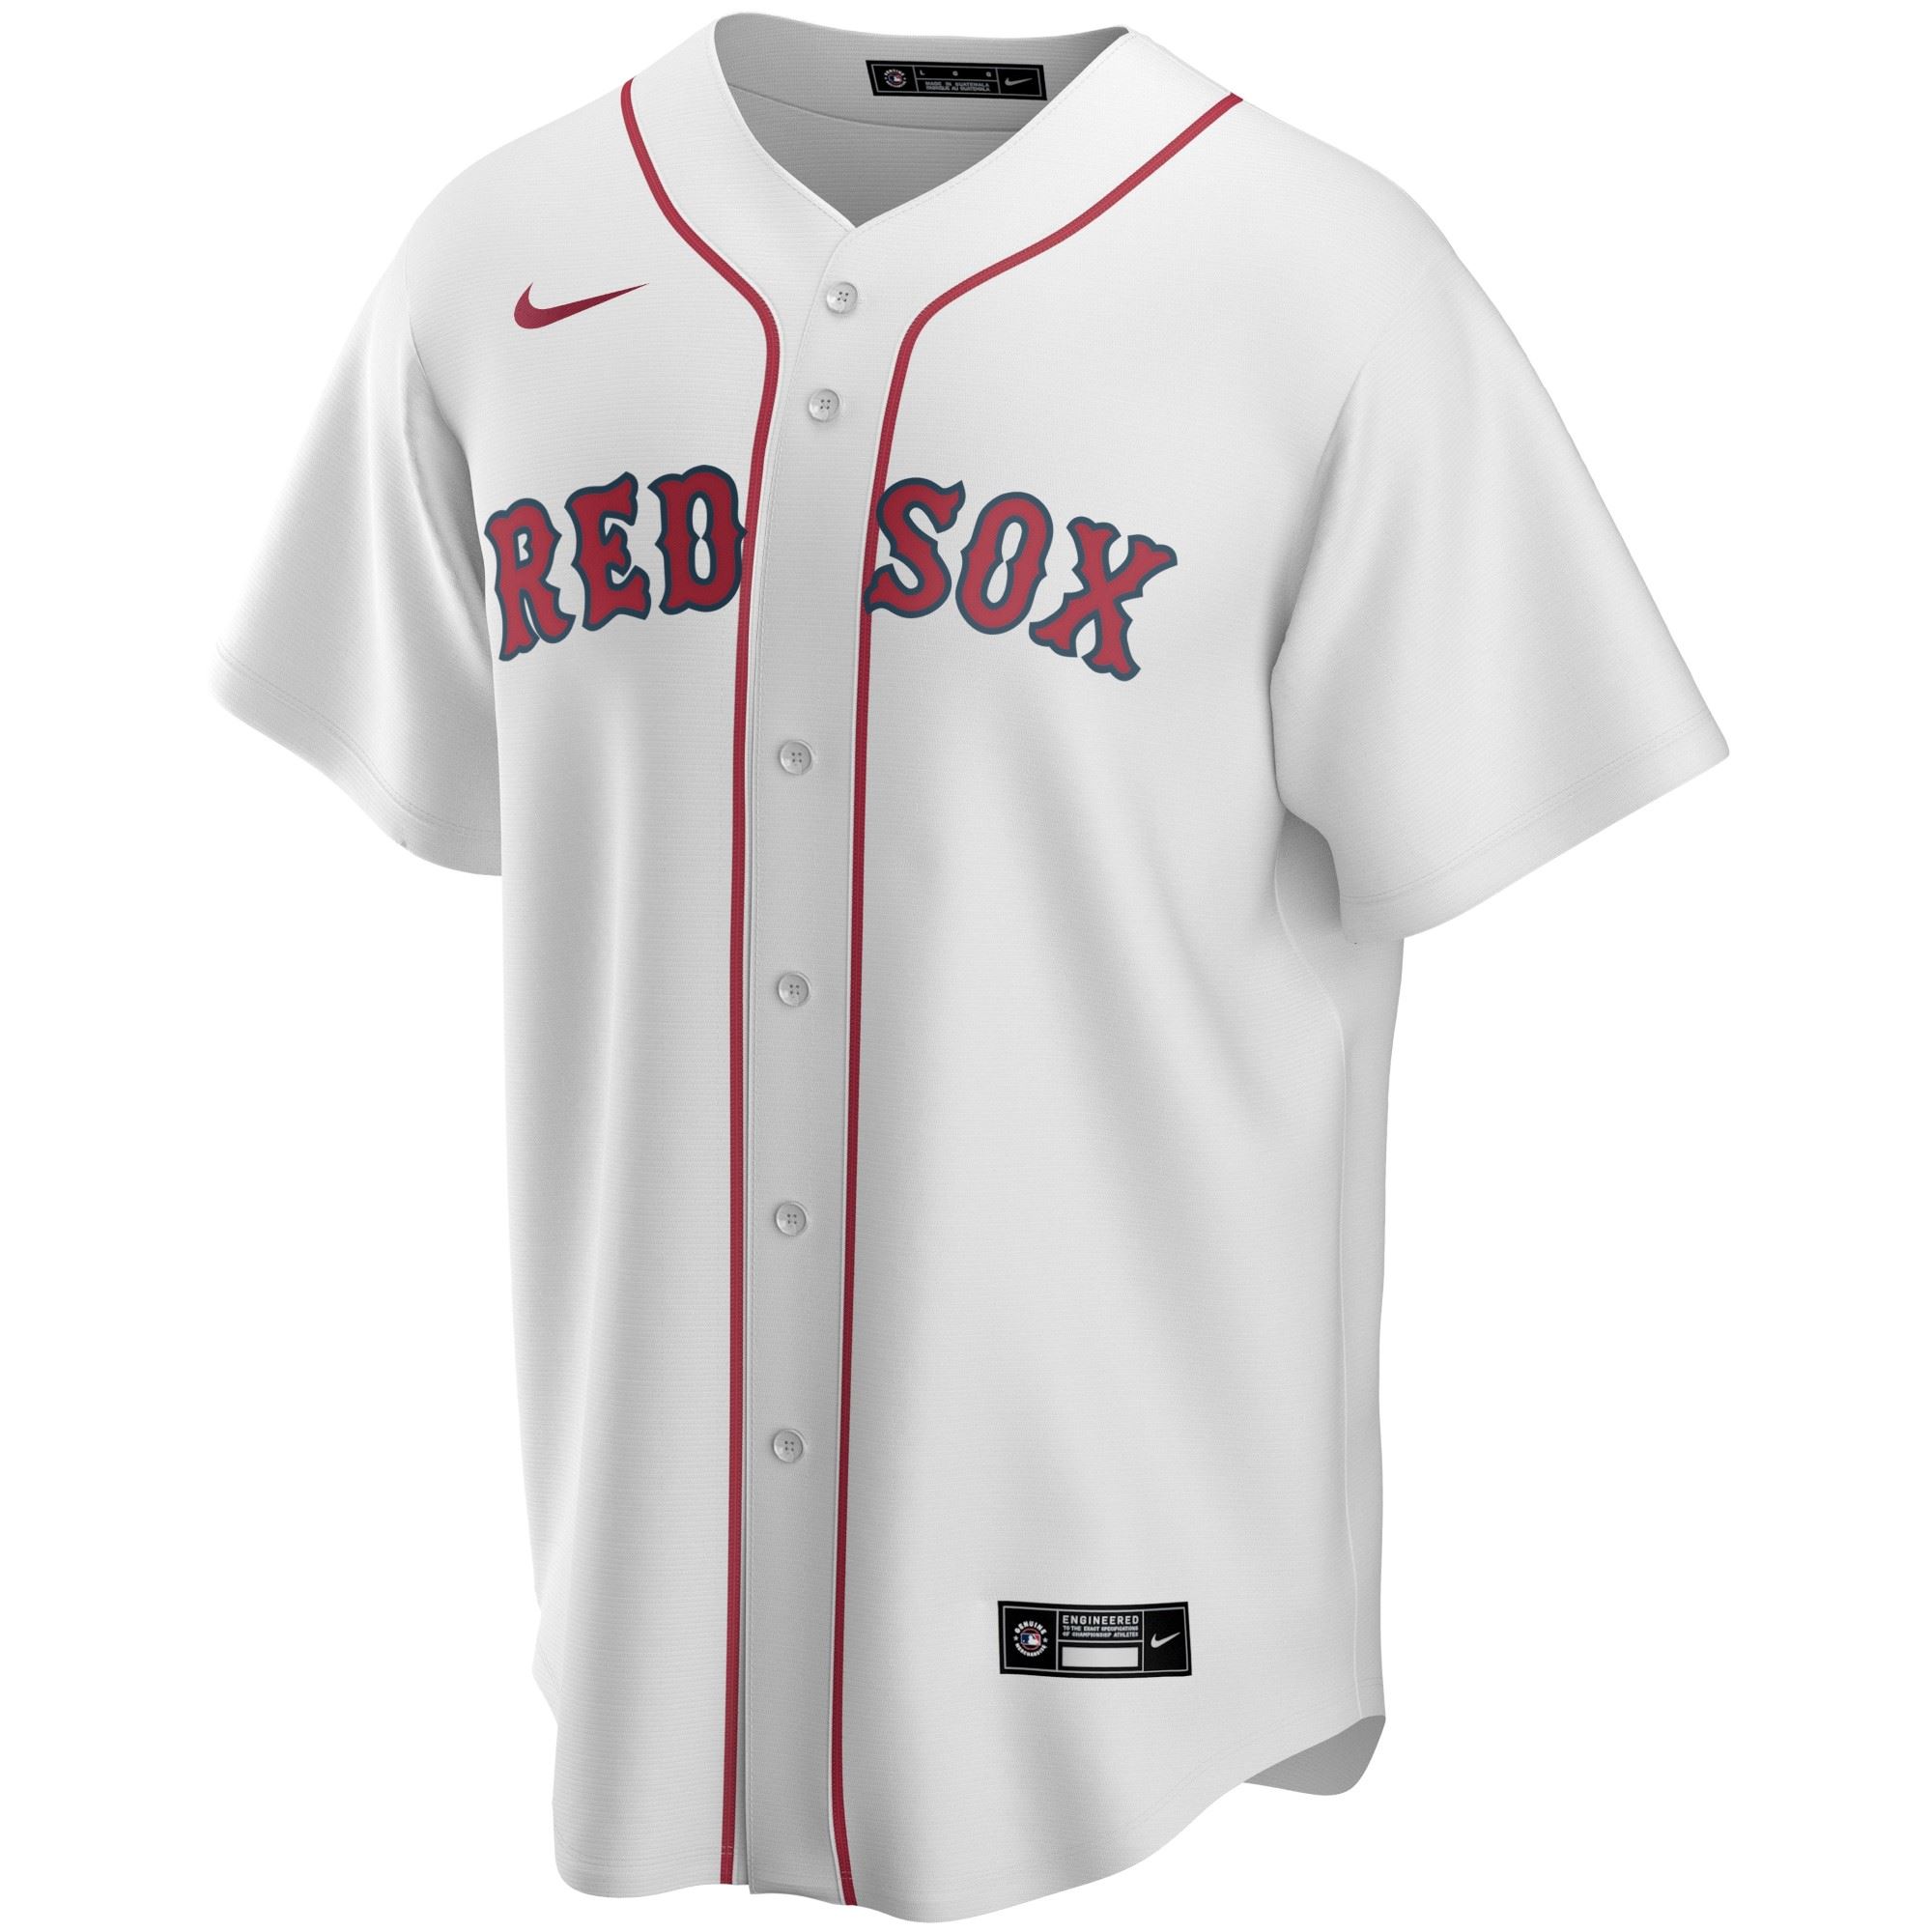 Boston Red Sox Official MLB Replica Home Jersey White Nike